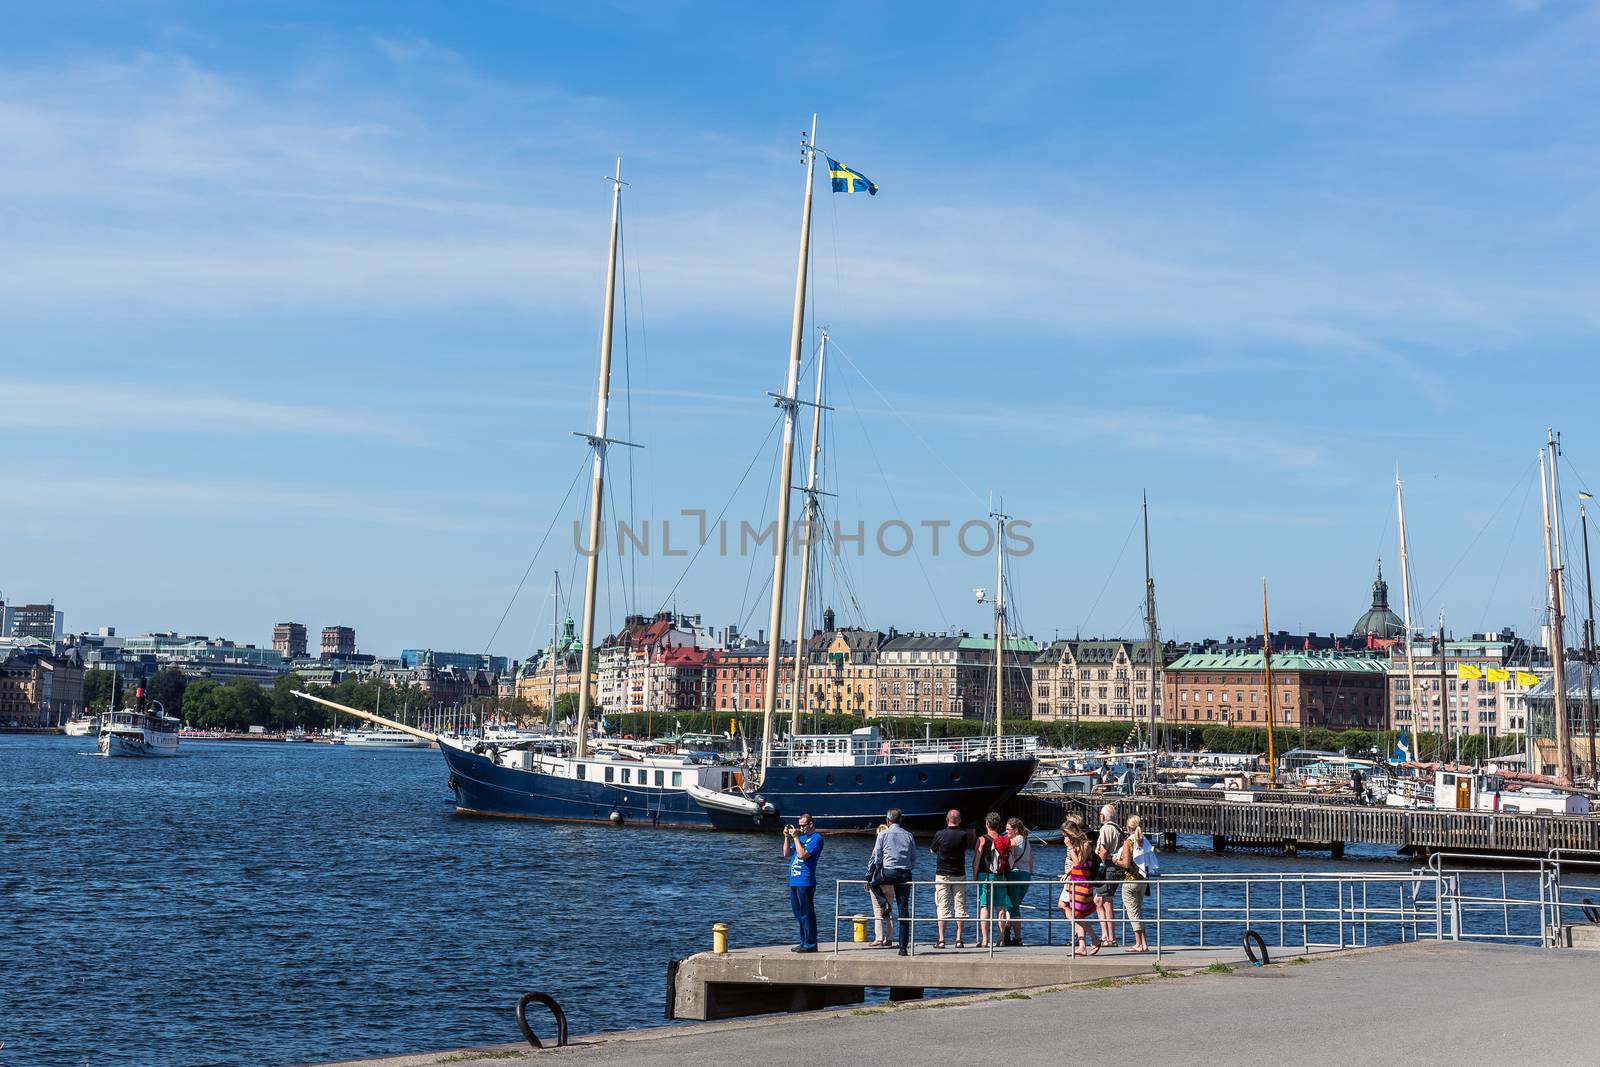 Passengers wait for a ferry in front of the Vasa Museum on the Djurgarden island in Stockholm. In the background Strandvagen boulevard, the most prestigious avenue in town.